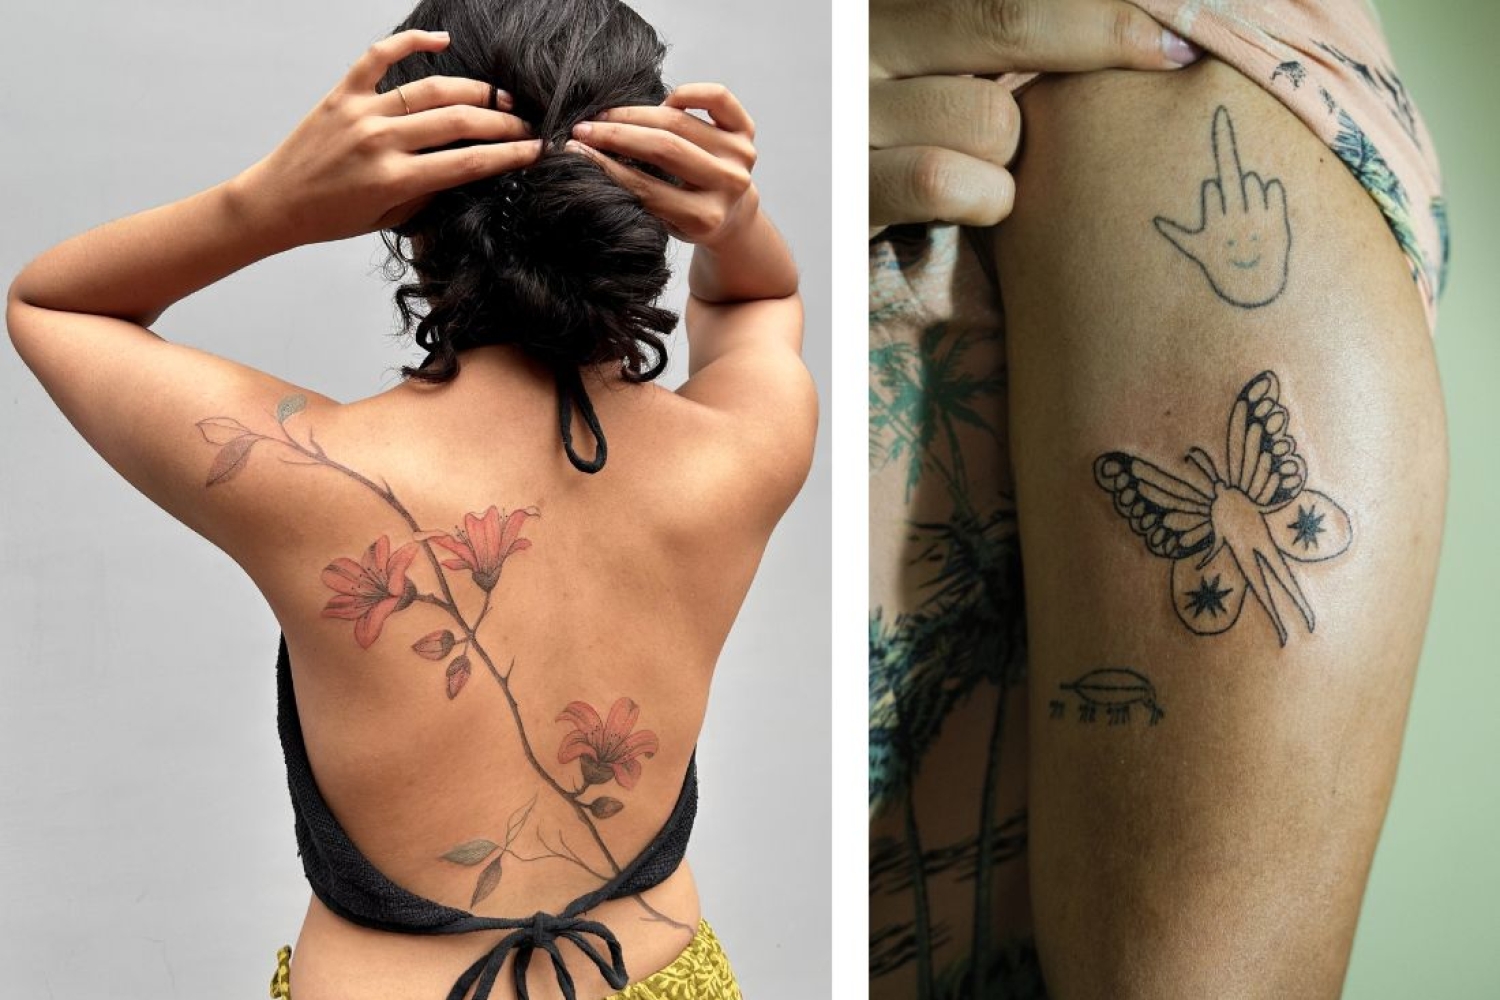 Blooming Bodies: Tattooing ‘Stick And Poke’